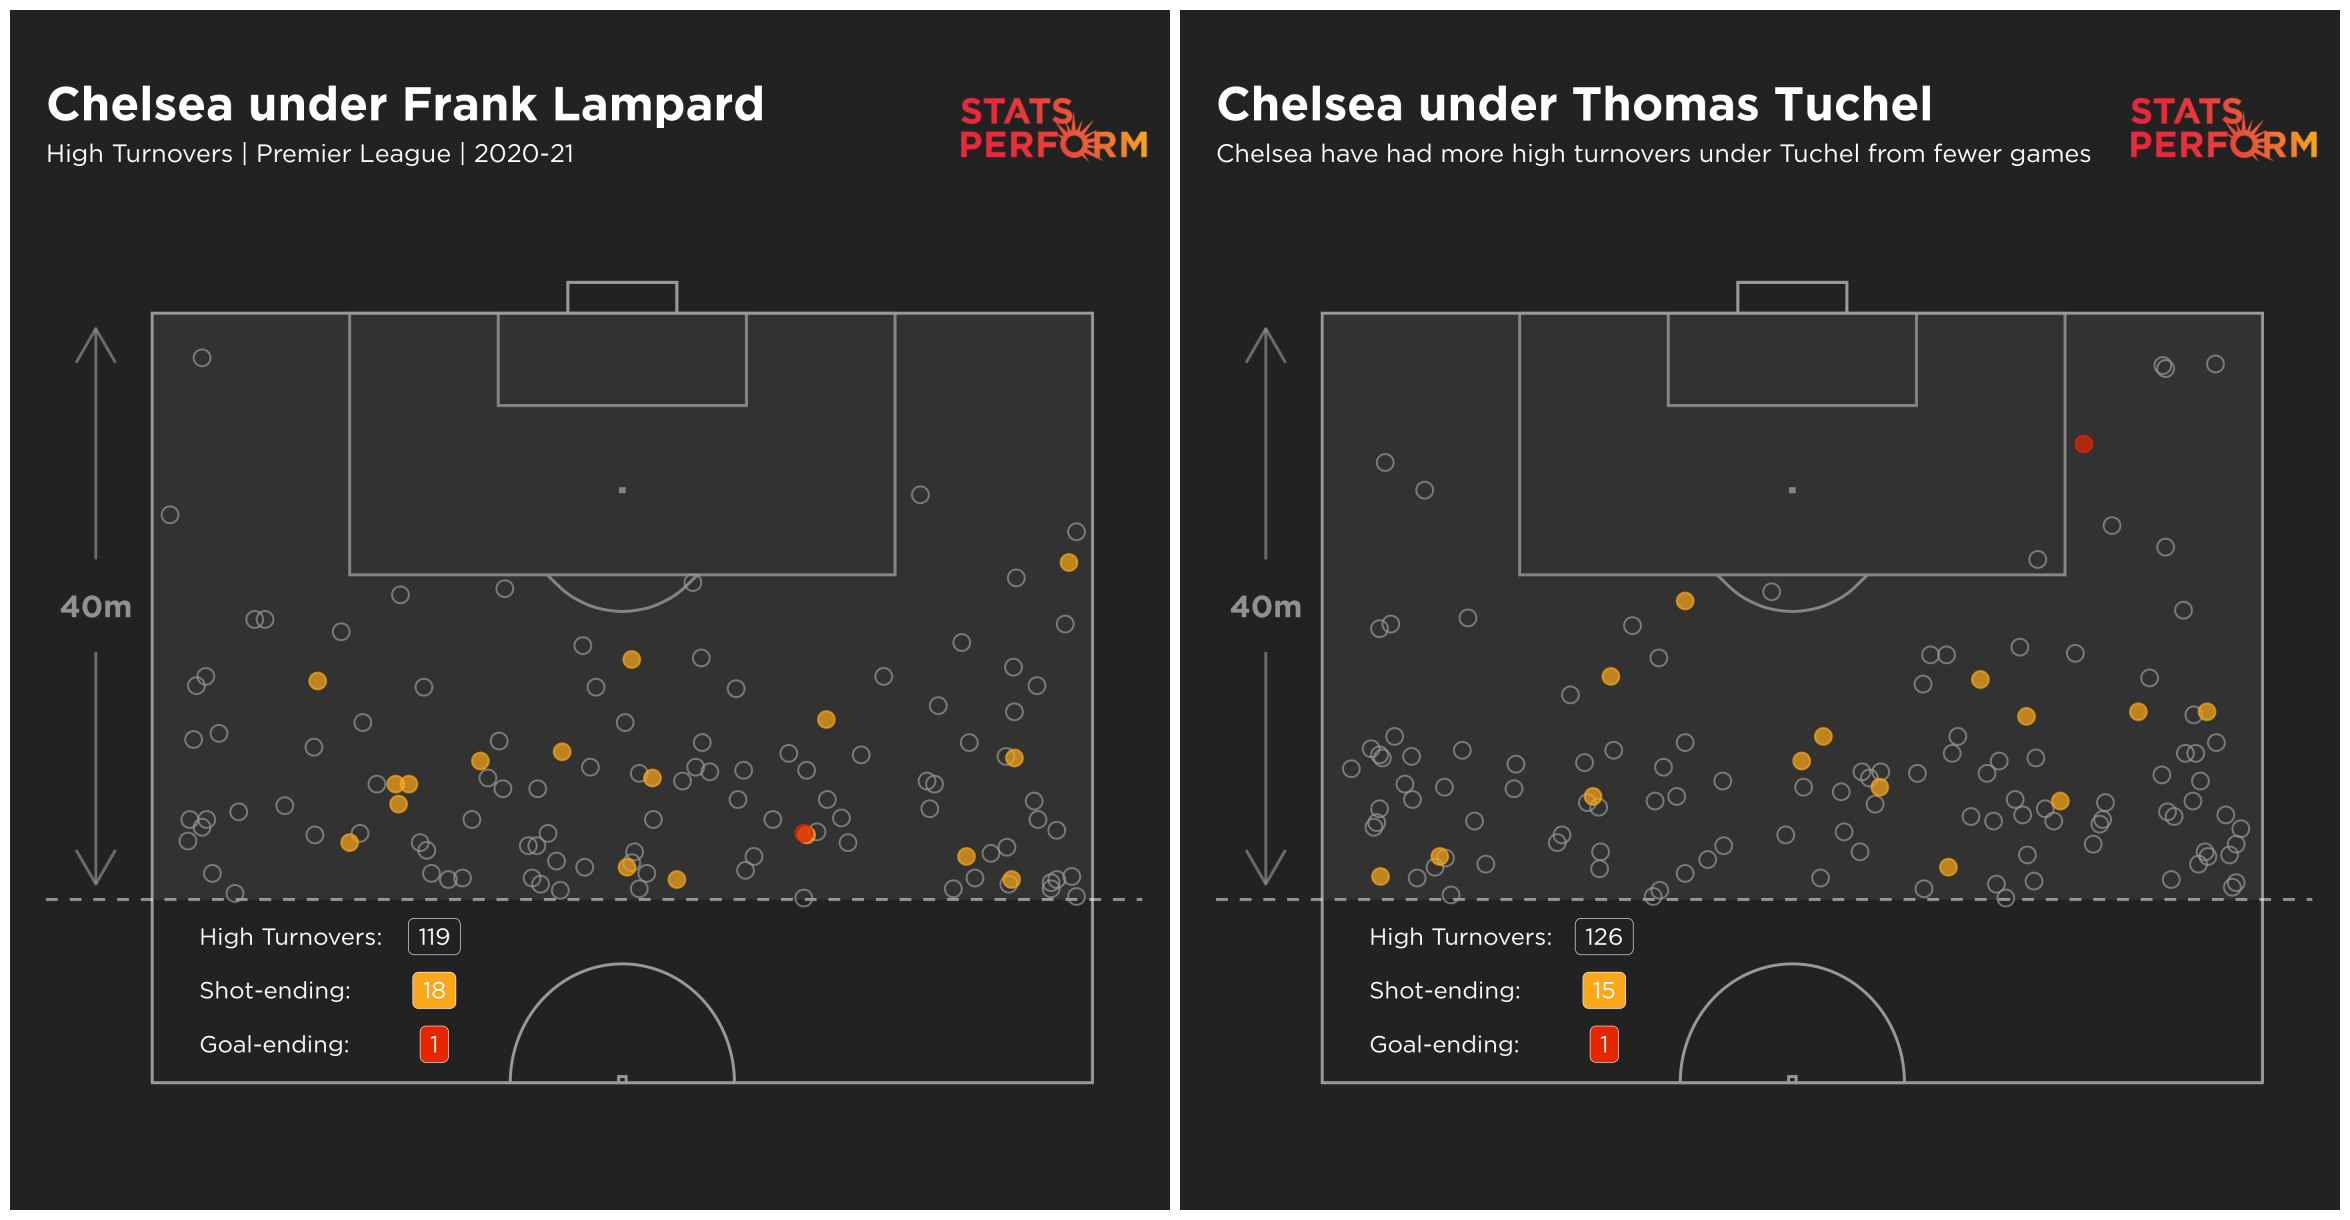 Chelsea have more high turnovers this season under Tuchel than Lampard despite playing fewer games for the German